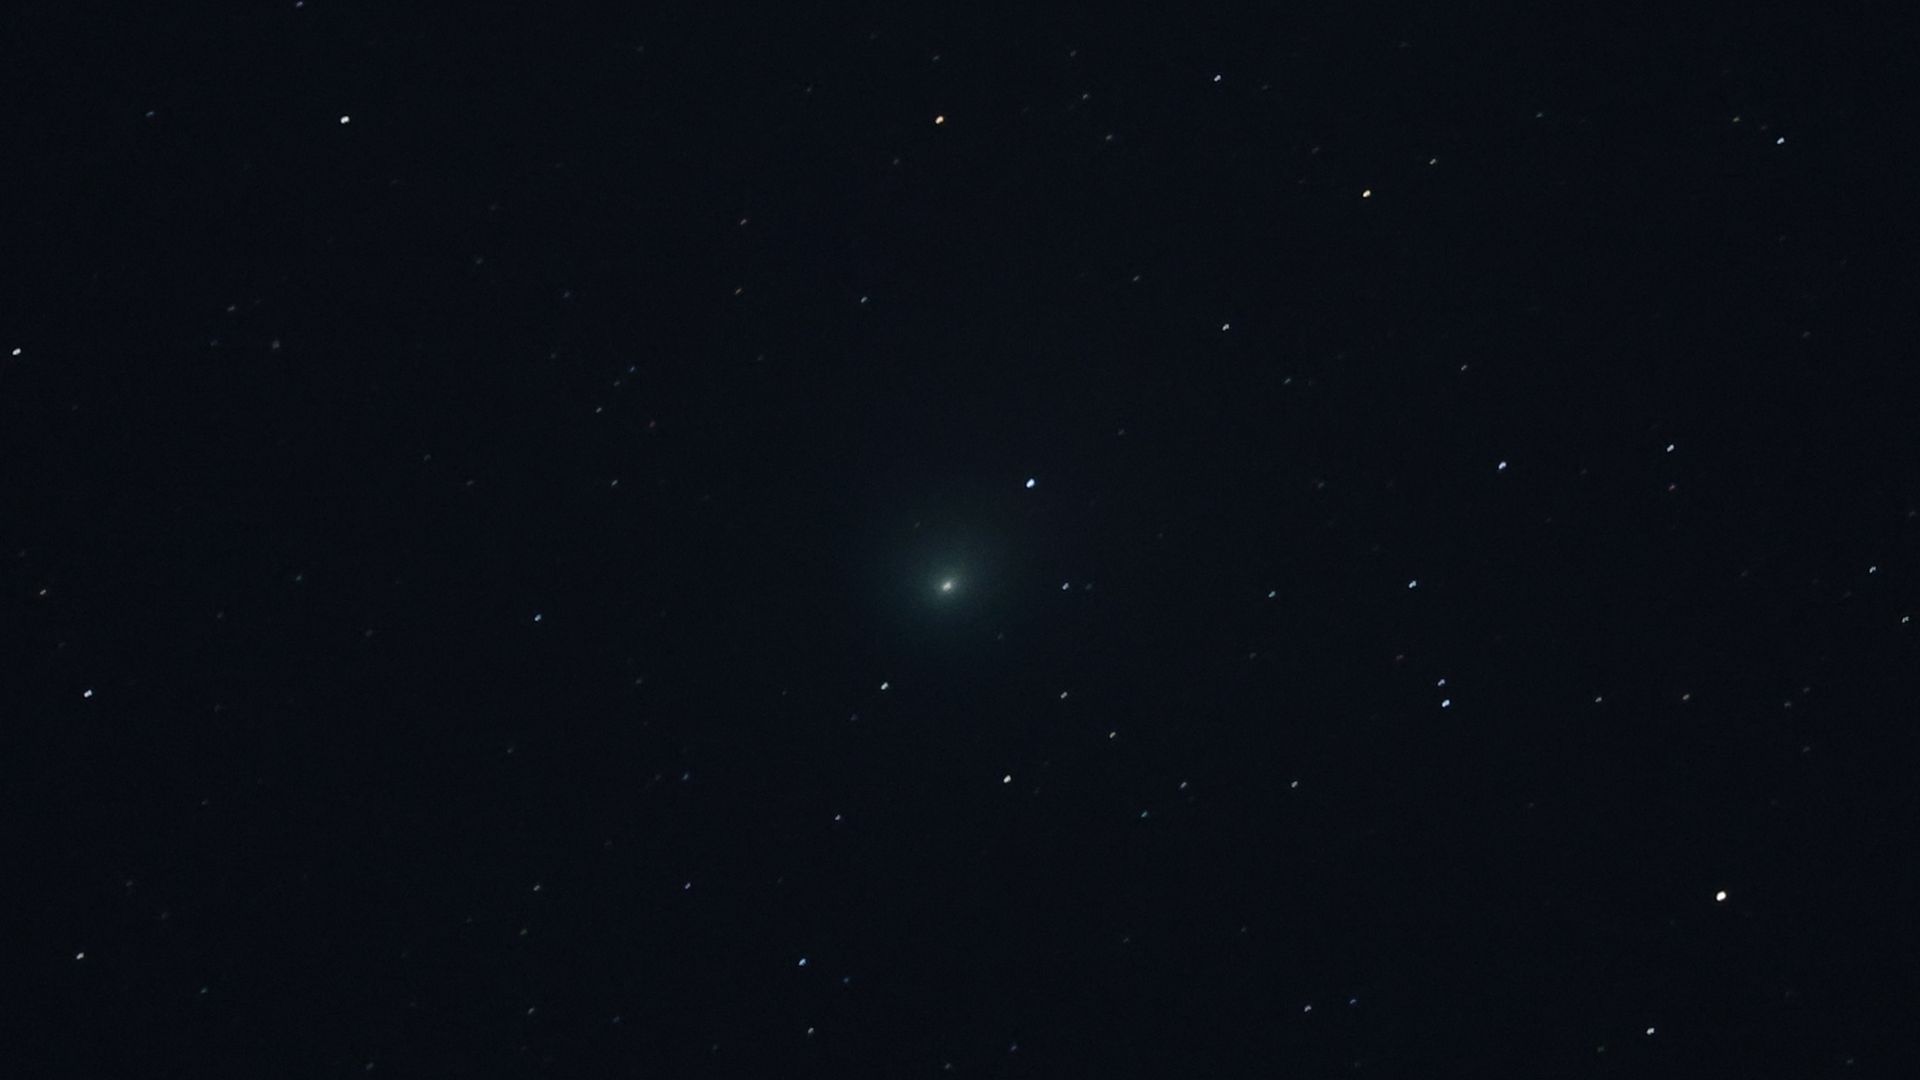 A green comet visible in the sky 